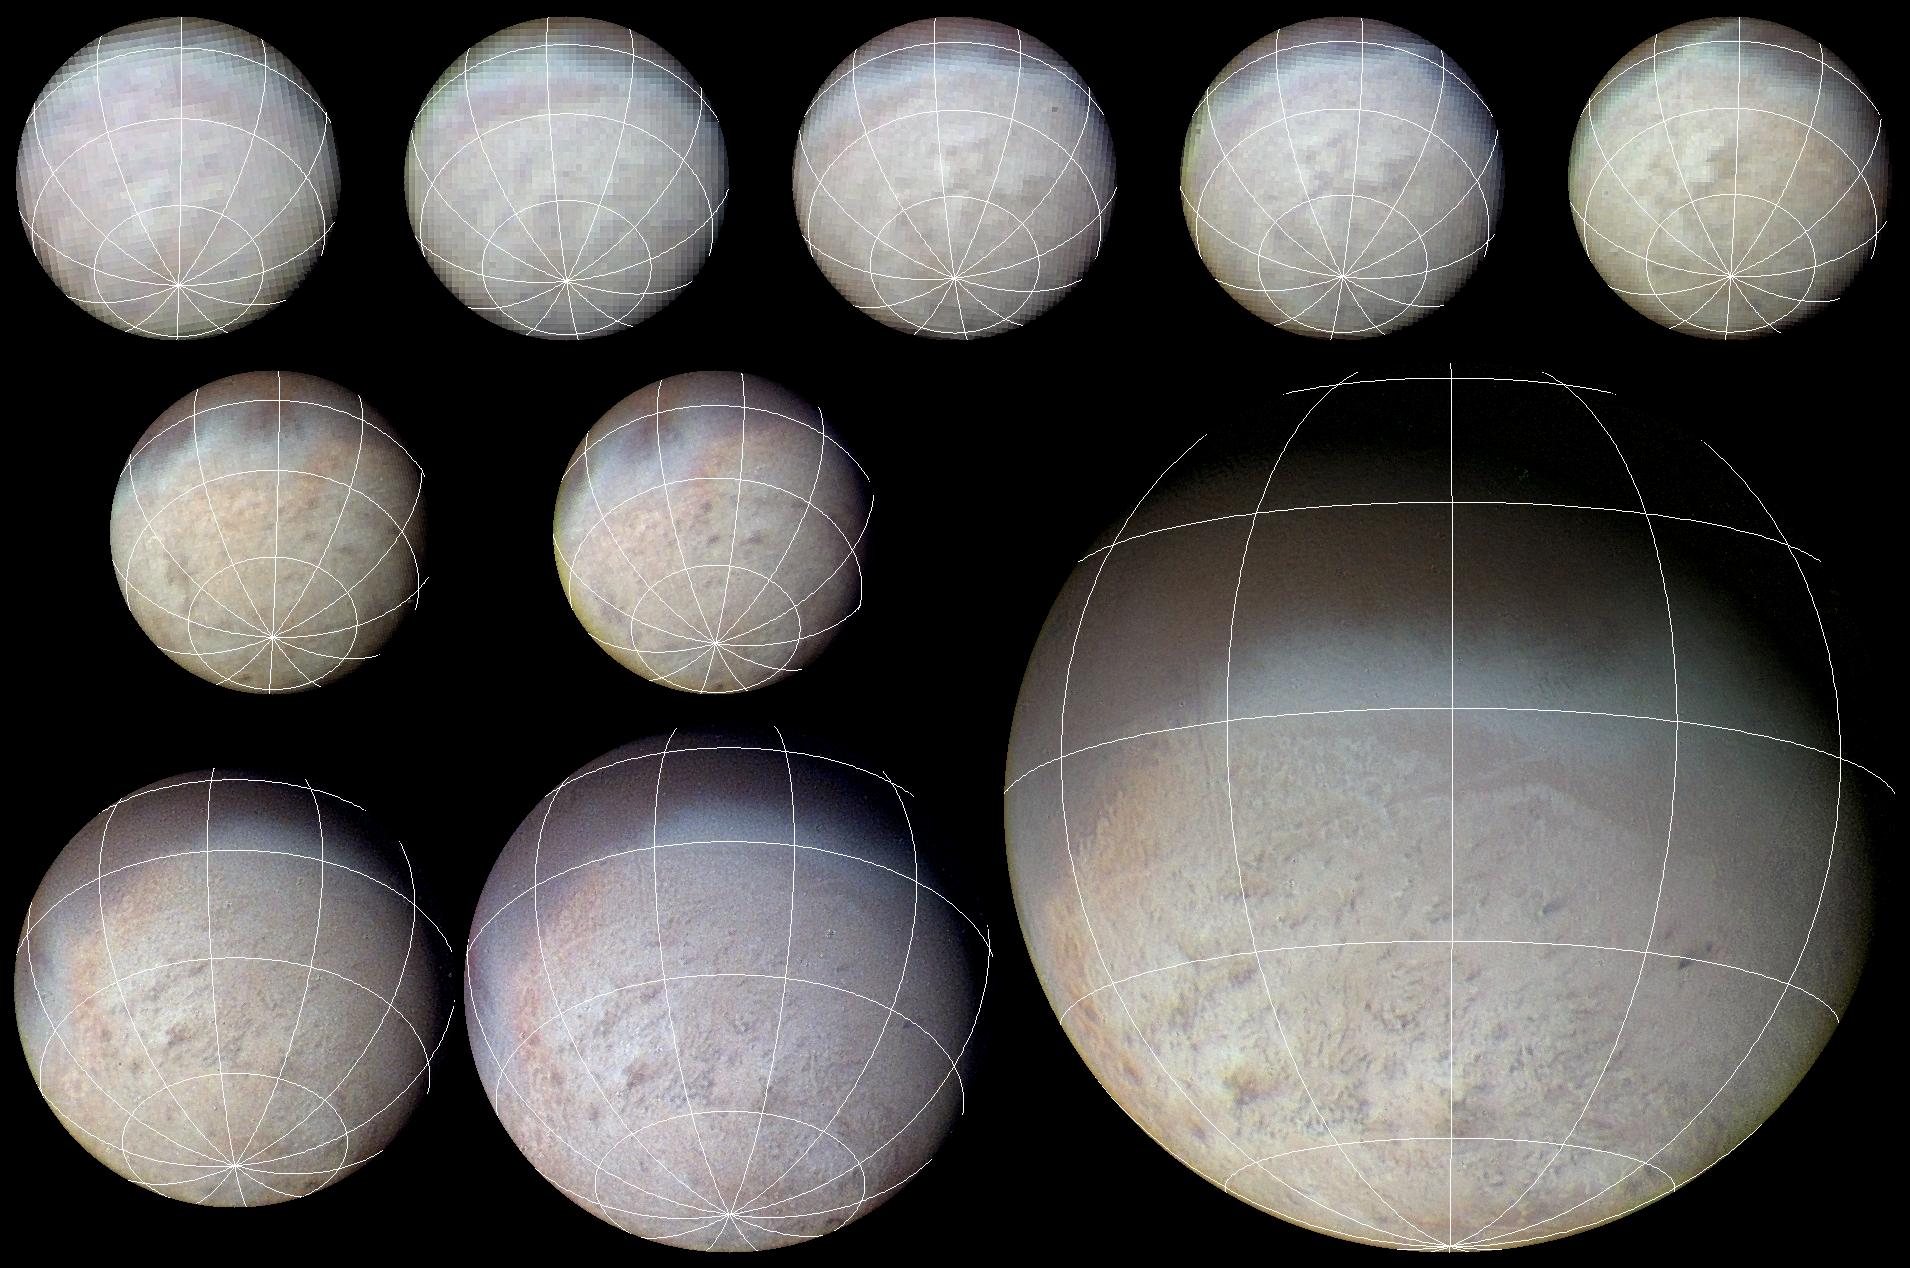 Triton Voyager 2 approach sequence with latitude-longitude grid superposed.